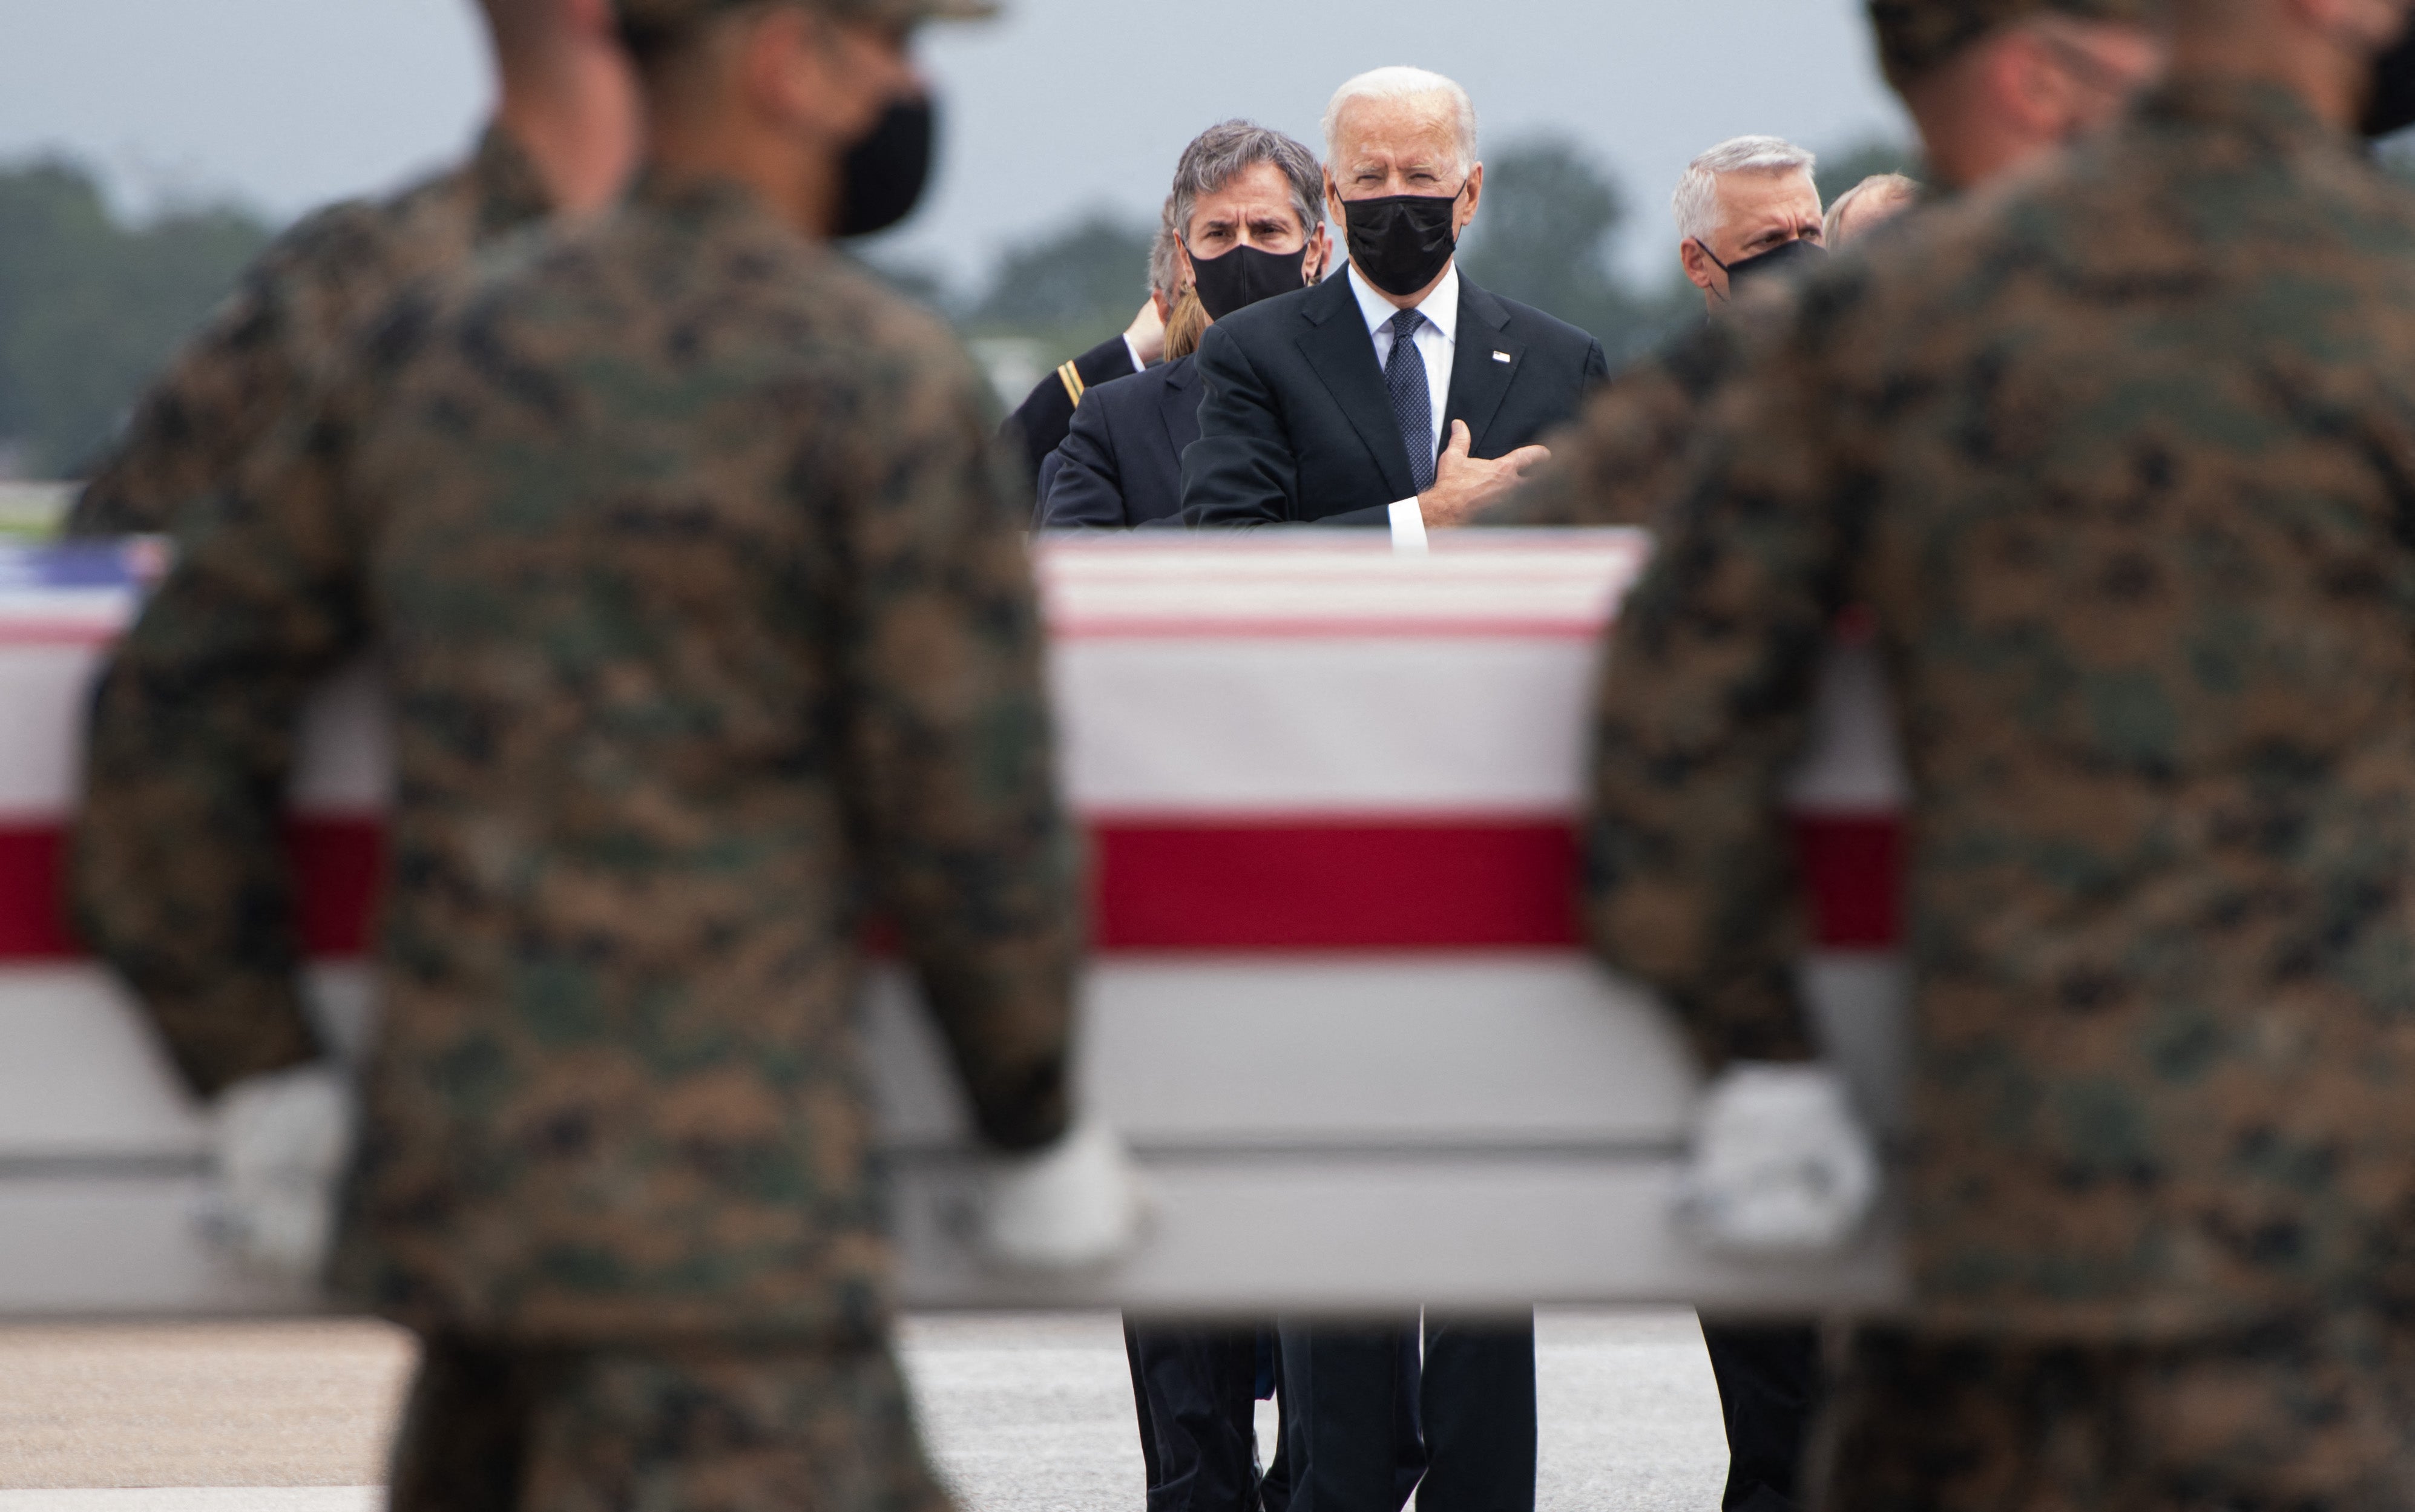 Joe Biden attended the dignified transfer of the remains of fallen service members at Dover Air Force Base in Dover, Delaware, on 29 August 2021